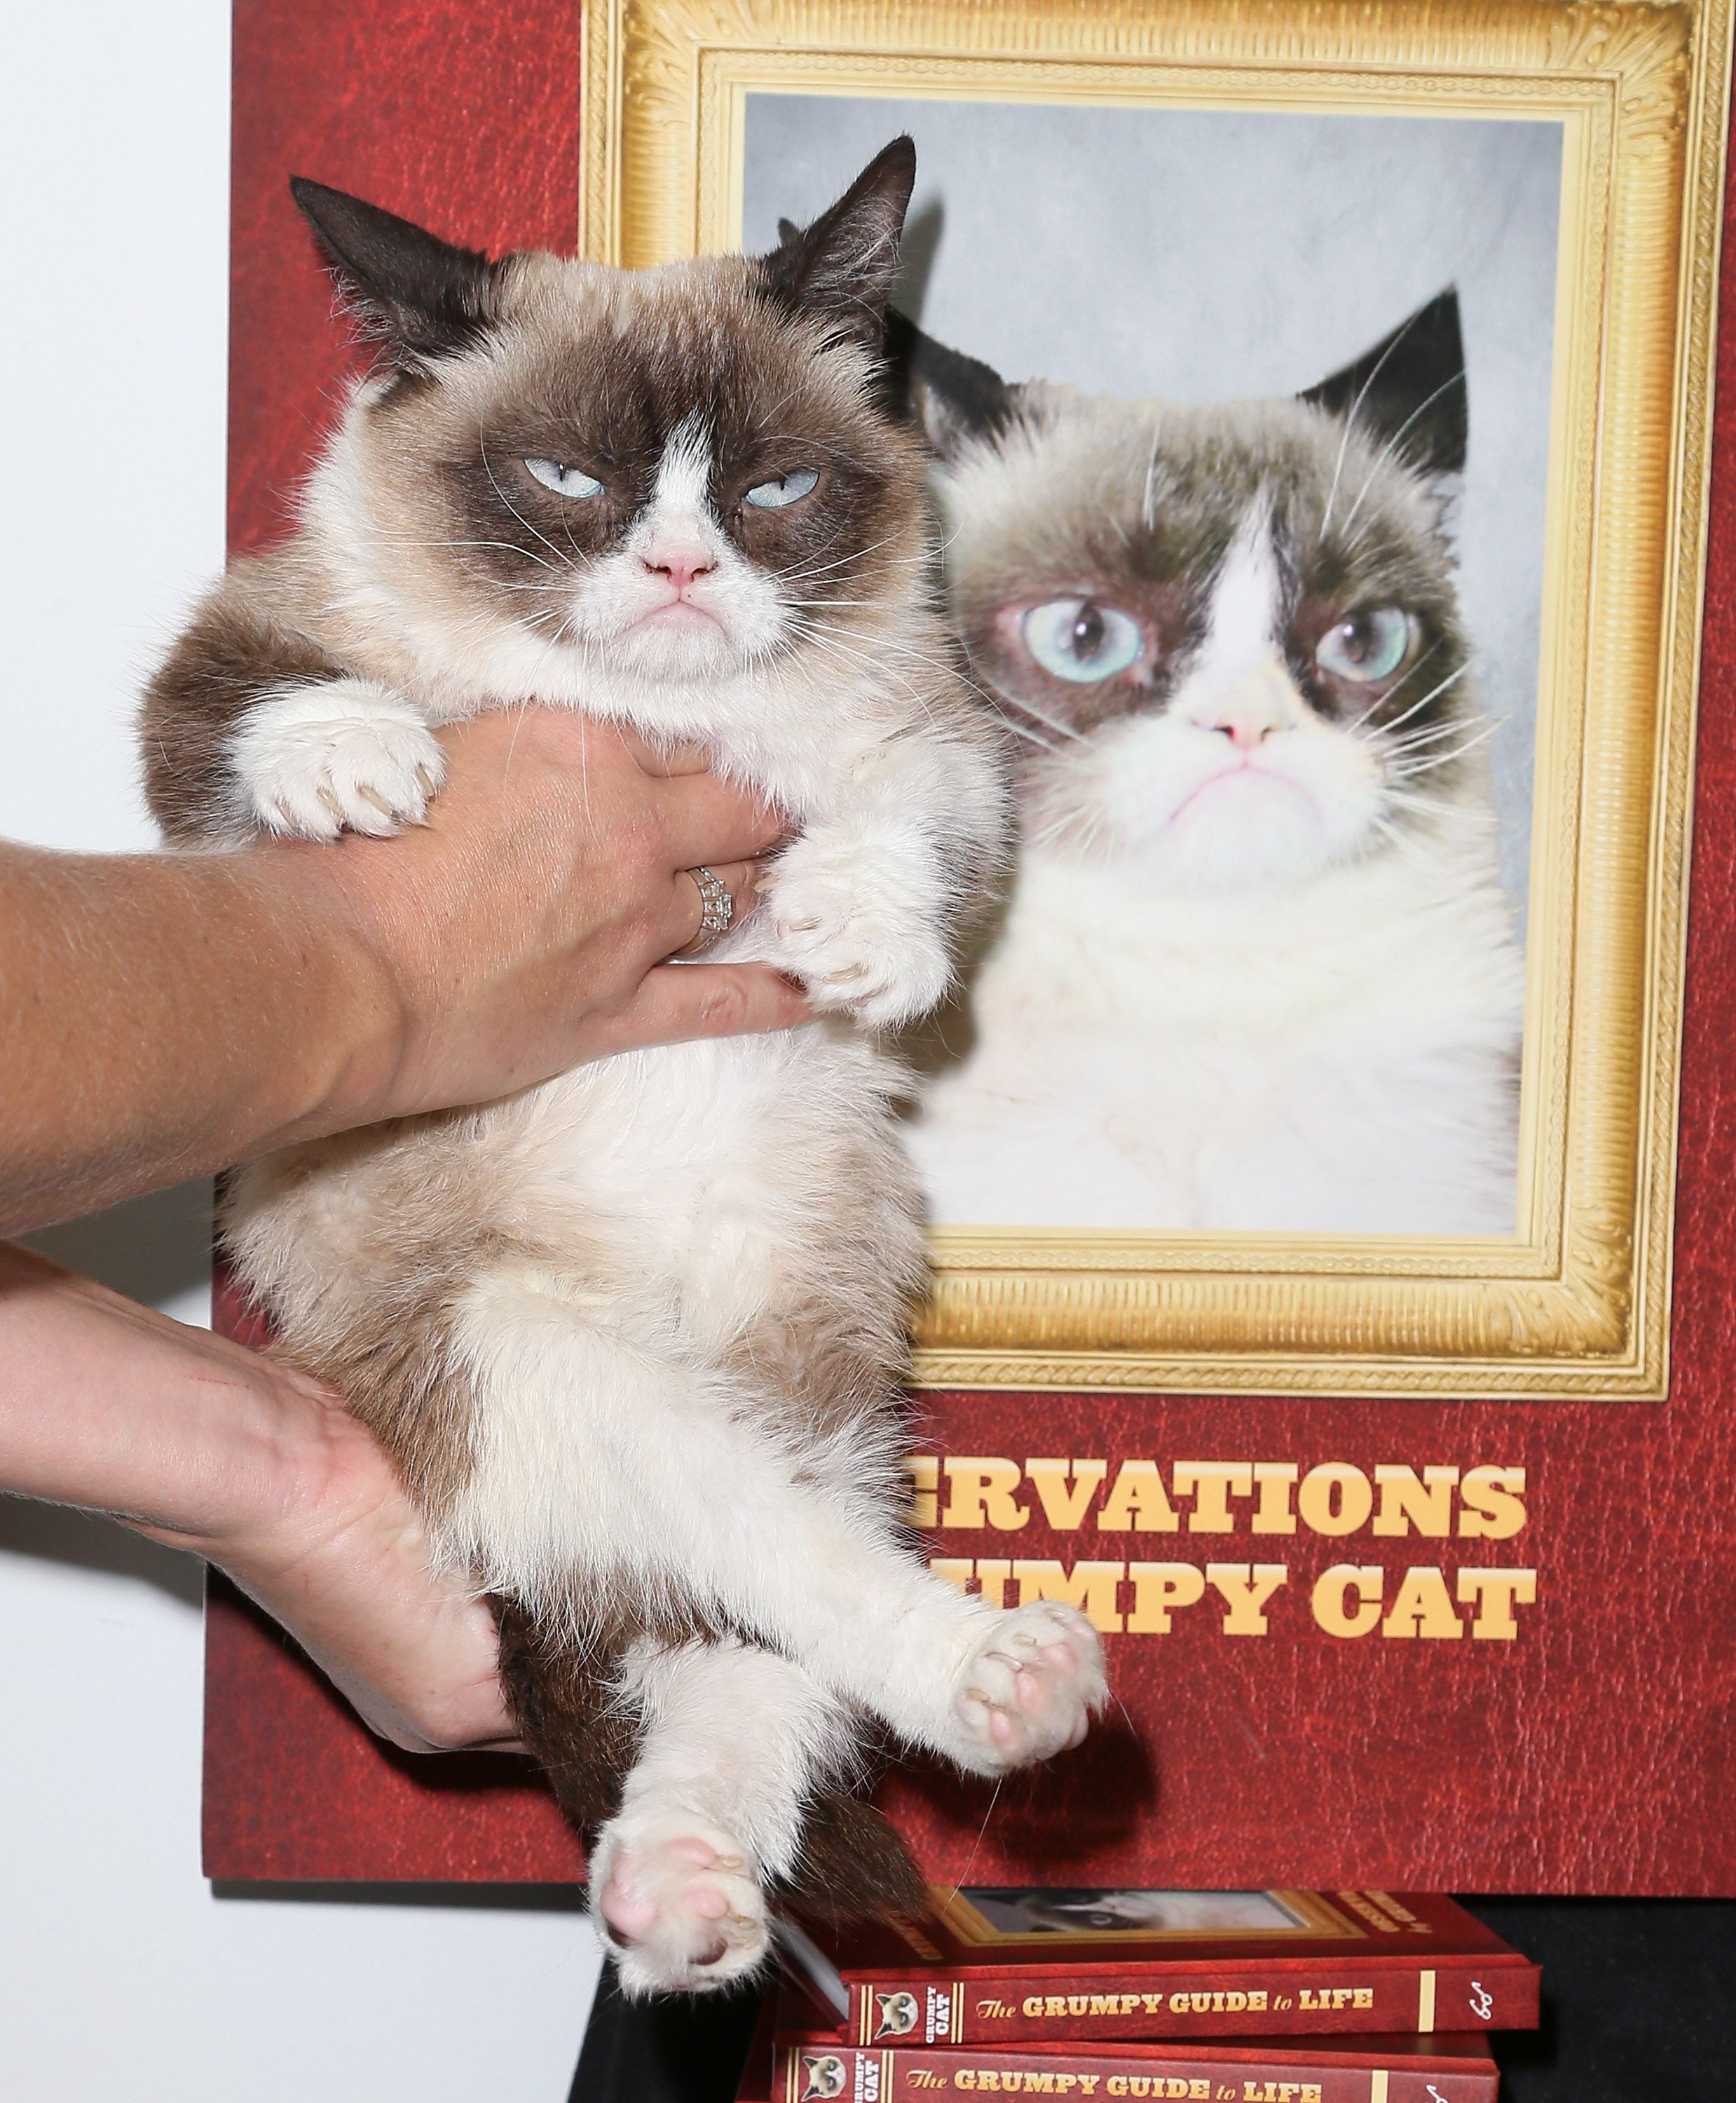 Grumpy Cat's owner quit her day job, but denies claim the crabby feline has  made $100 million - ABC7 Los Angeles